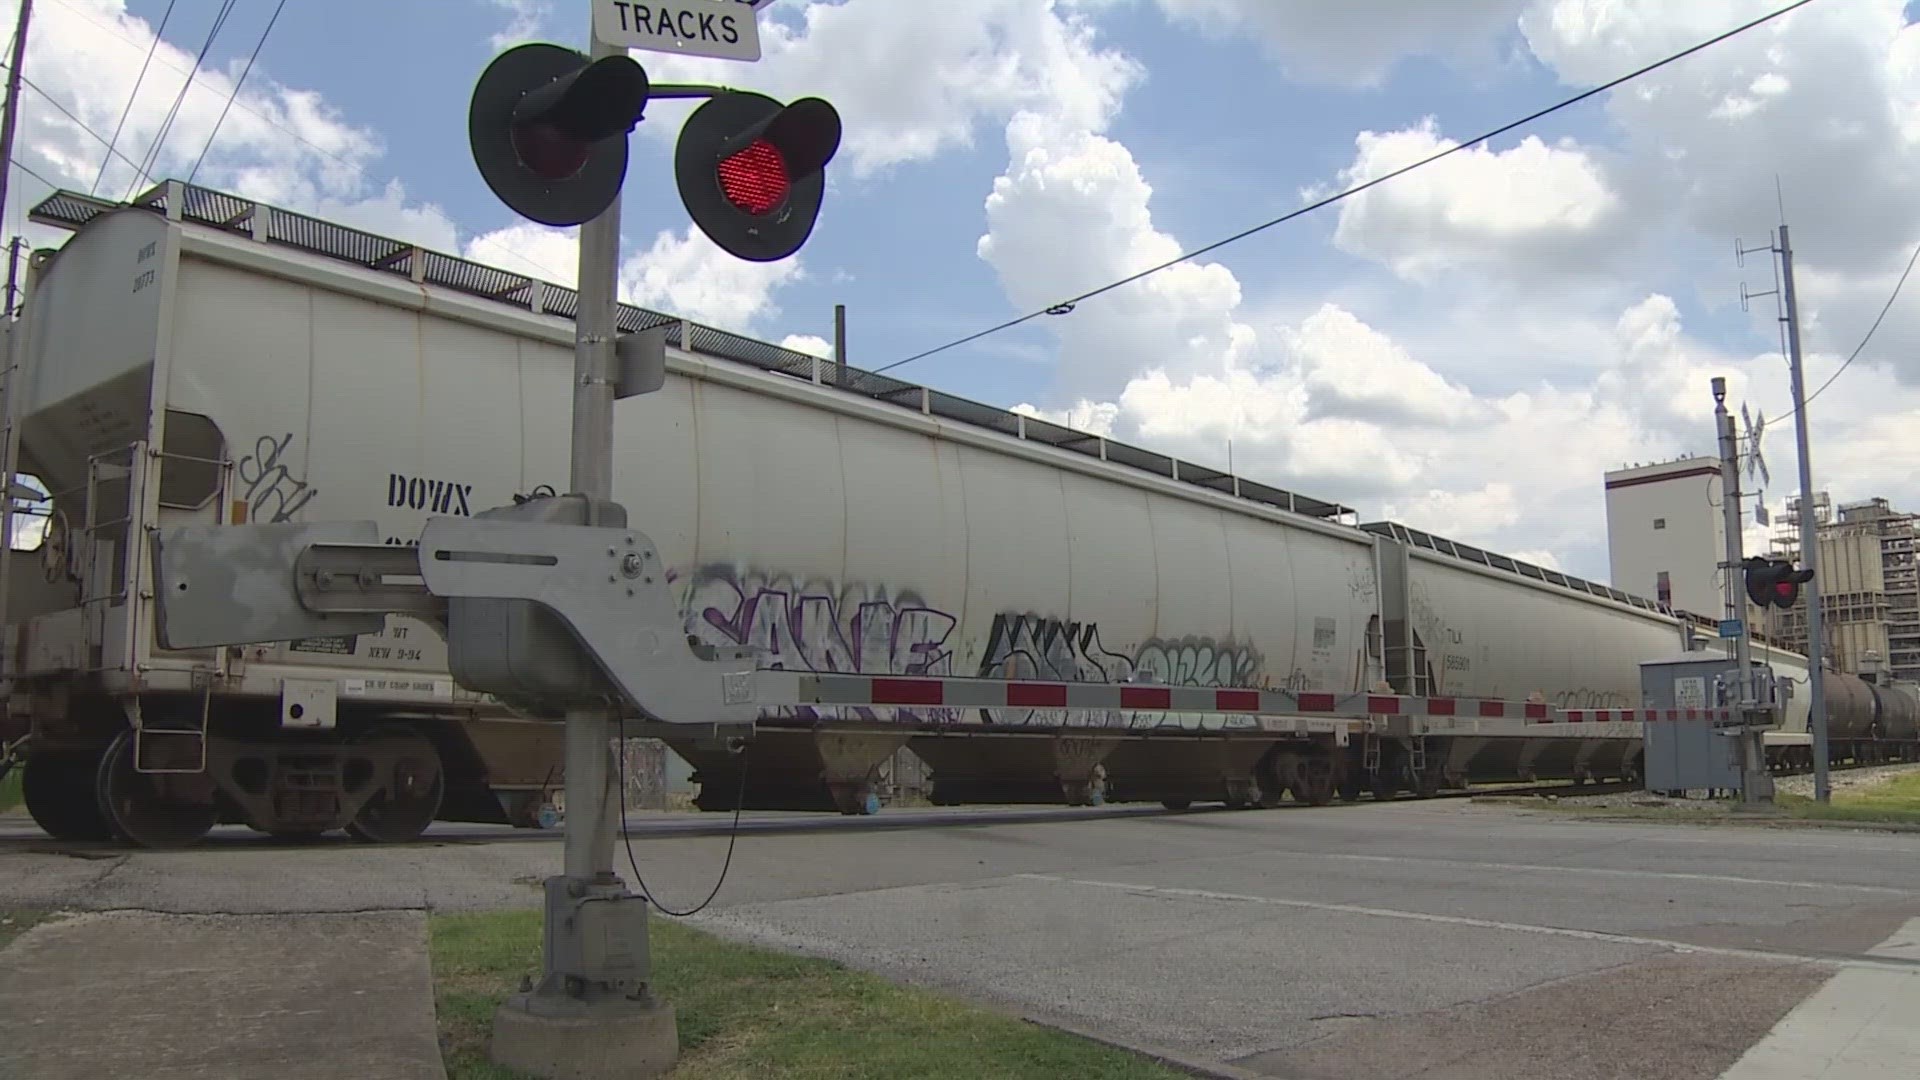 The Federal Railroad Administration recently awarded Houston $36.9 million to build ways around the train tracks that cause headaches for so many drivers.